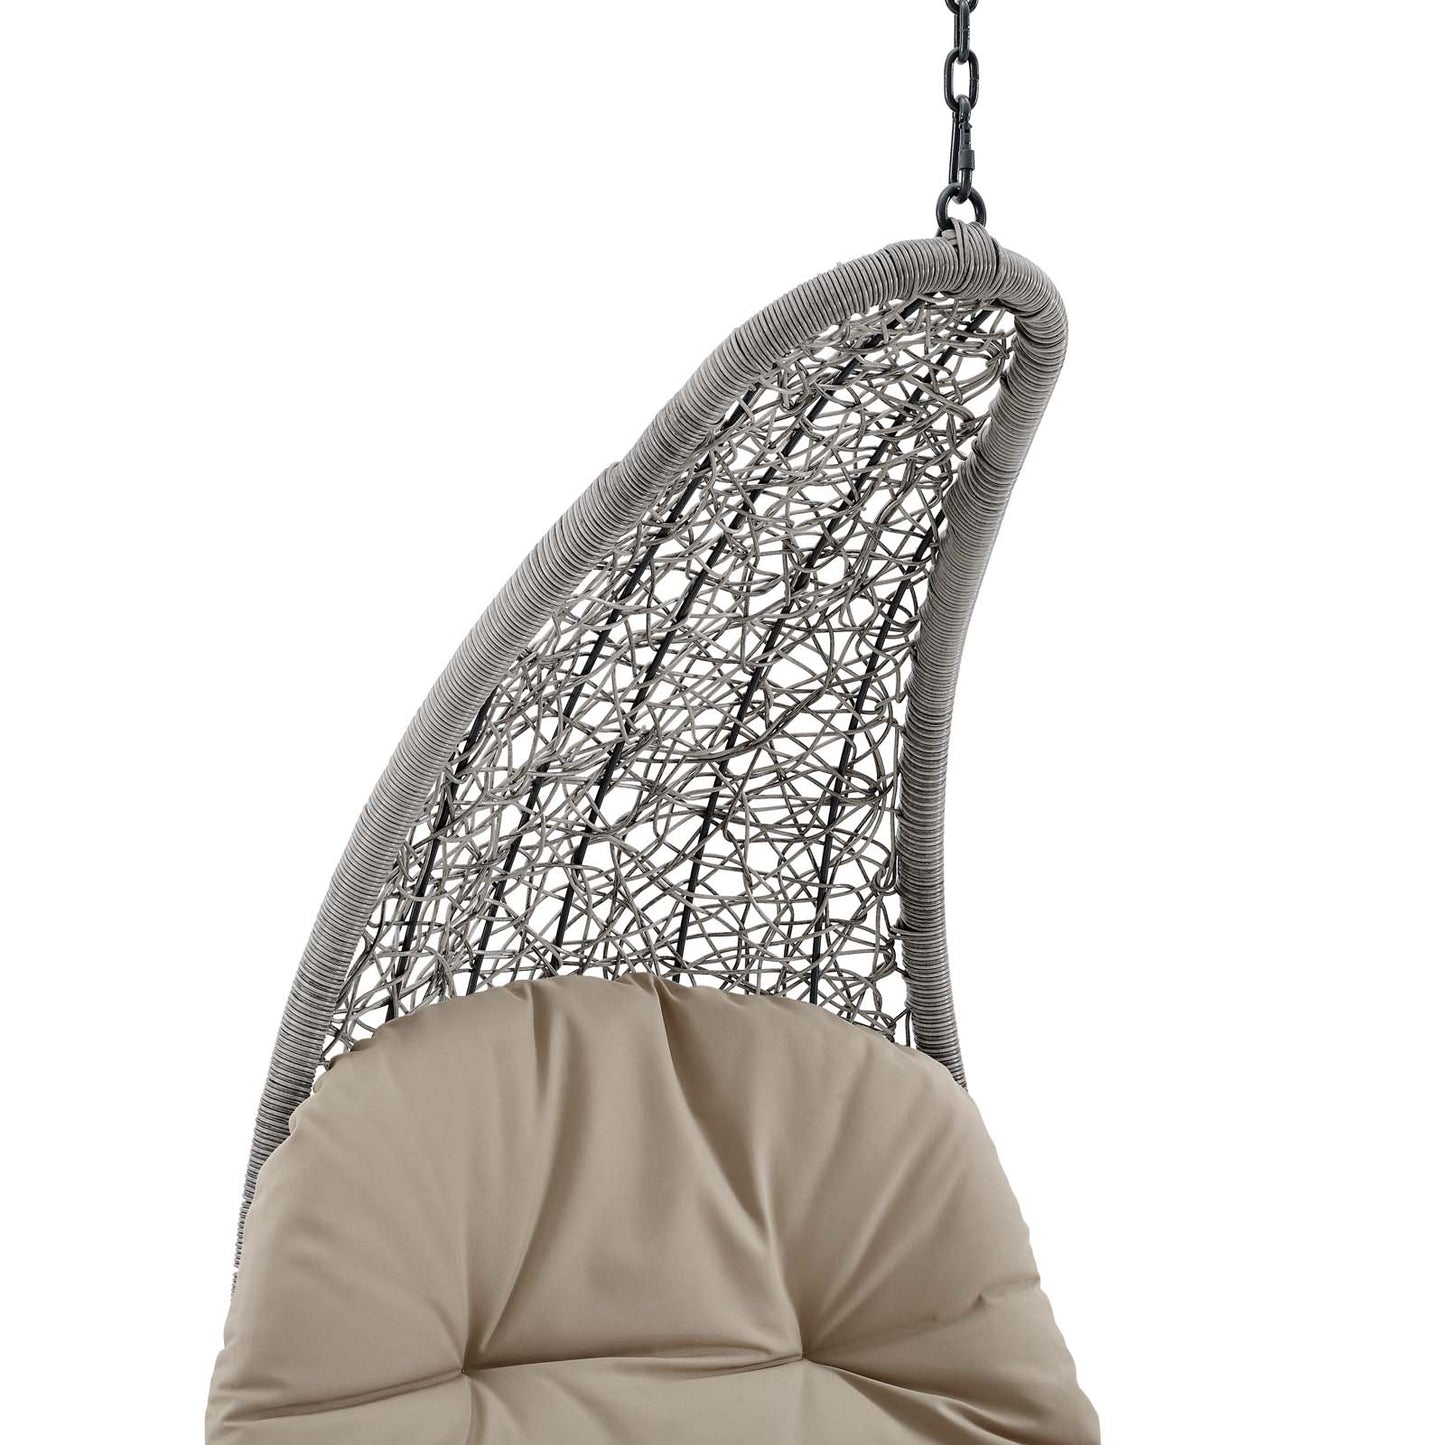 Landscape Hanging Chaise Lounge Outdoor Patio Swing Chair Light Gray Beige EEI-4589-LGR-BEI